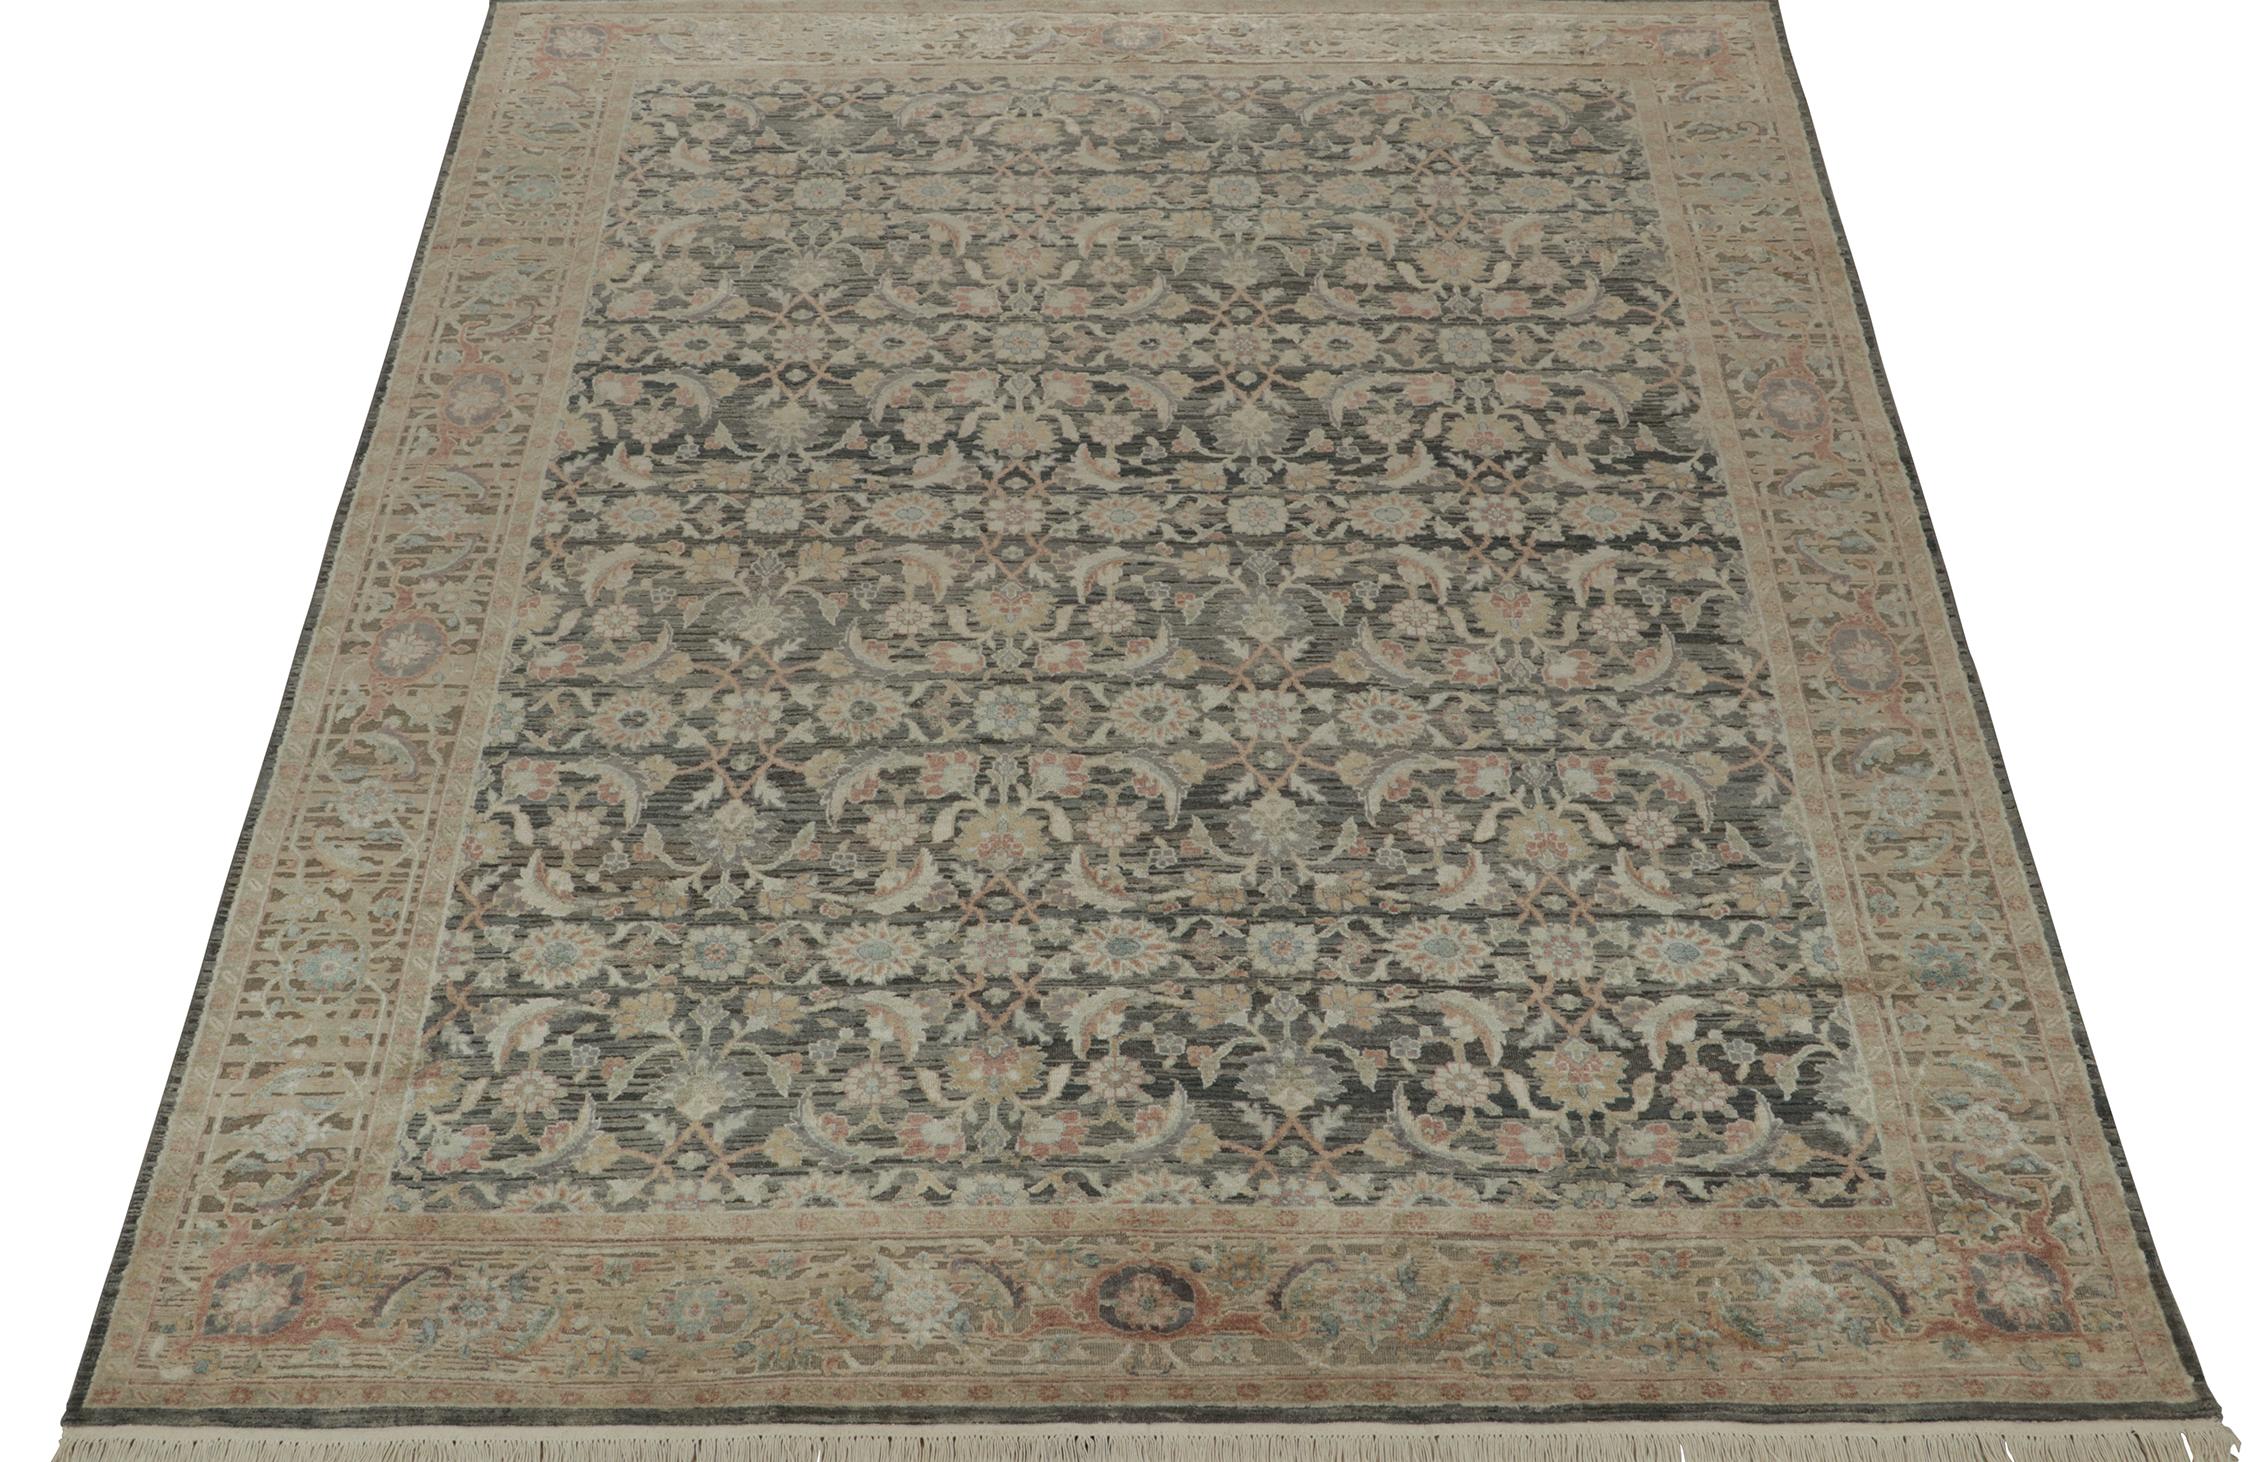 Indian Rug & Kilim’s Herati Style Rug with Gray, Blue and Beige-Brown Floral Patterns For Sale